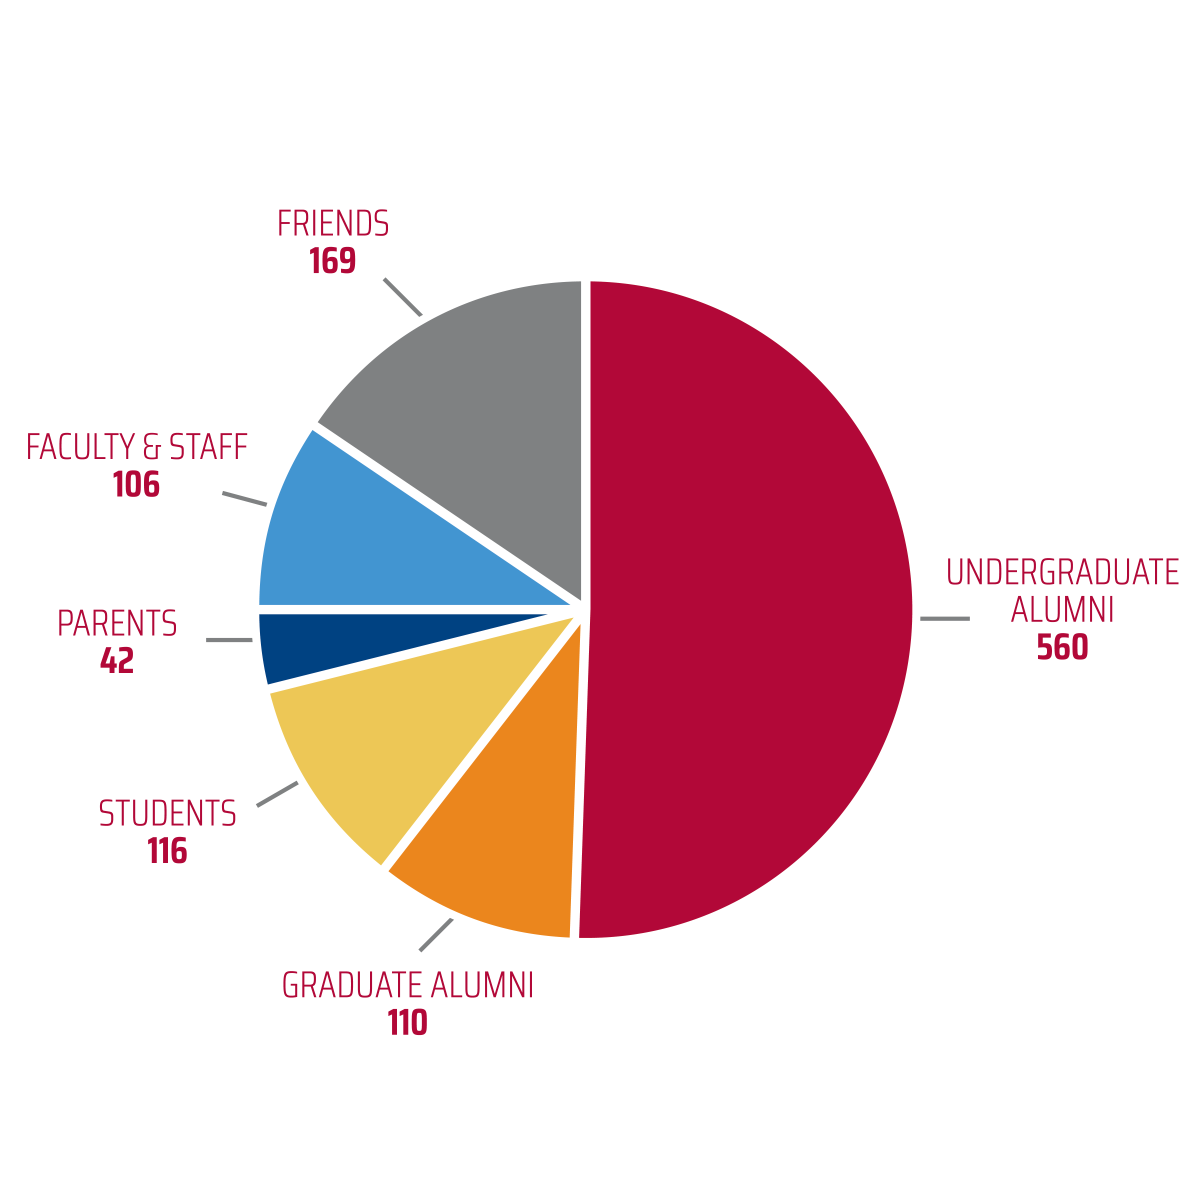 Pie chart representing the donors from Day of Giving 2023: 560 undergraduate alumni, 169 friends, 106 faculty and staff, 42 parents, 116 students, and 110 graduate alumni